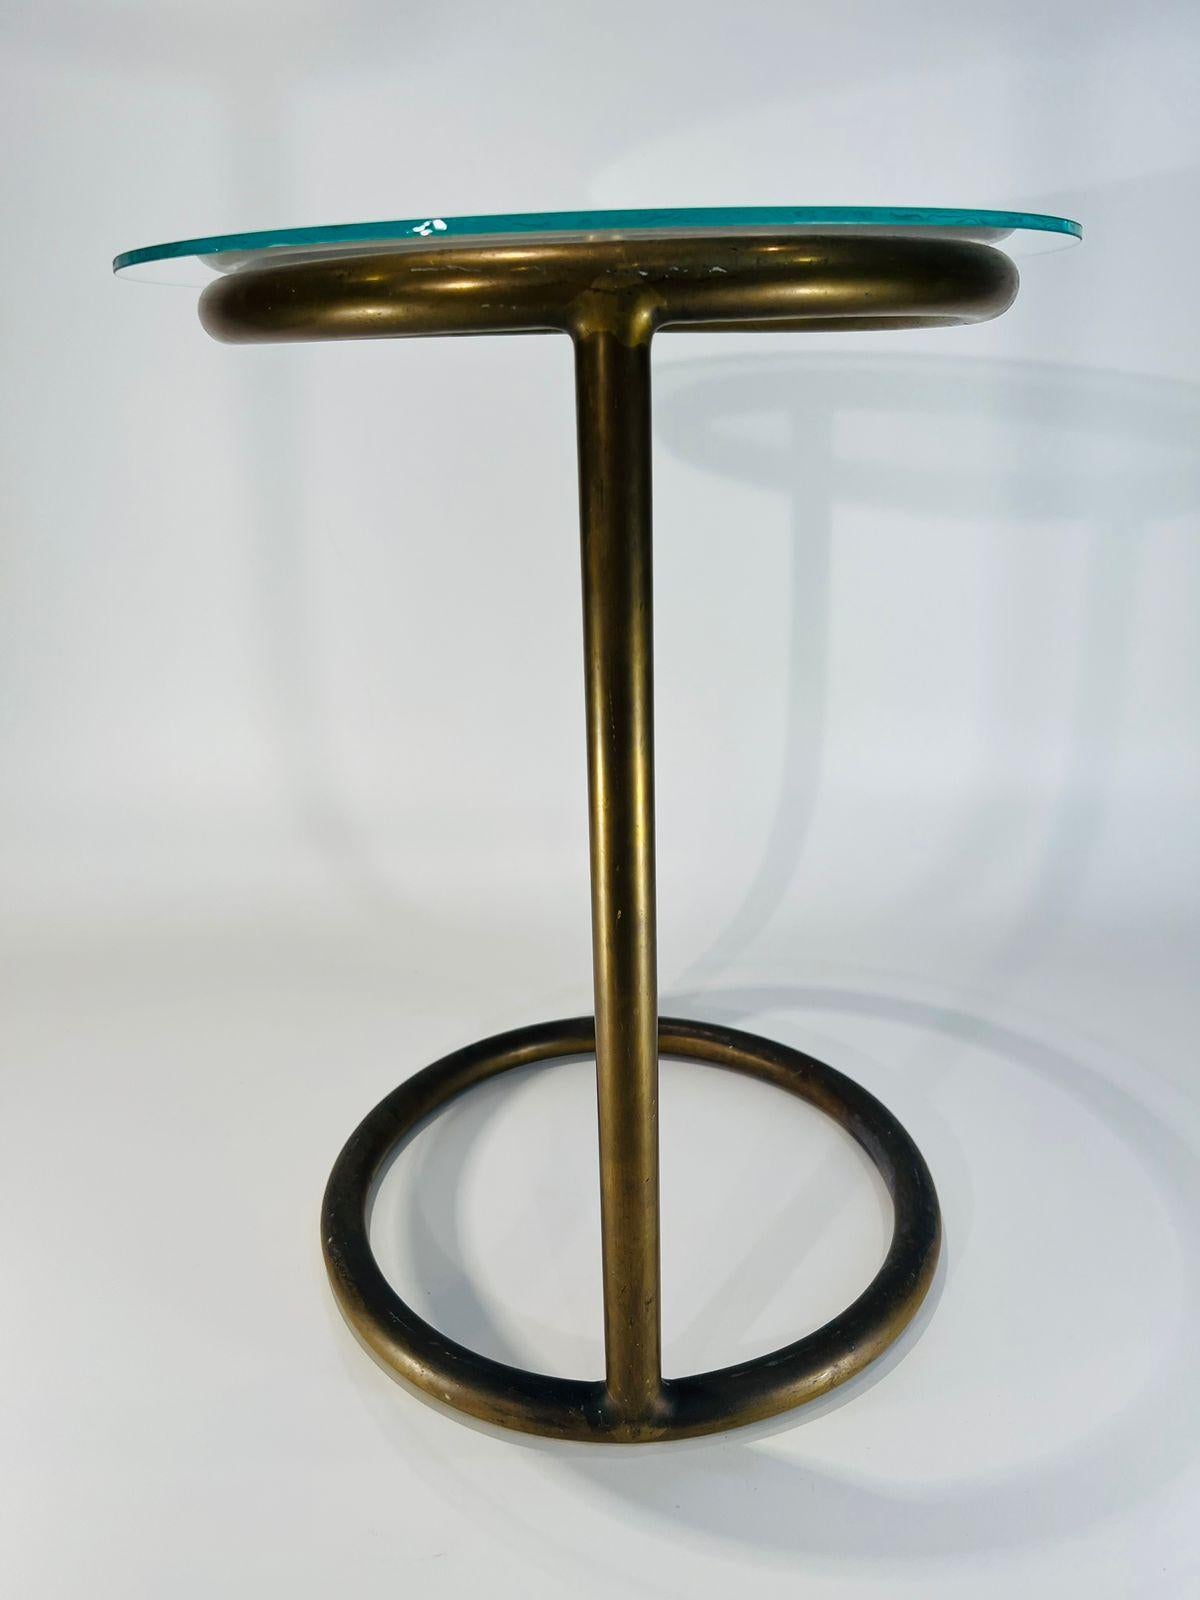 Eileen Gray side table in metal and glass circa 1930 Art Deco In Good Condition For Sale In Rio De Janeiro, RJ